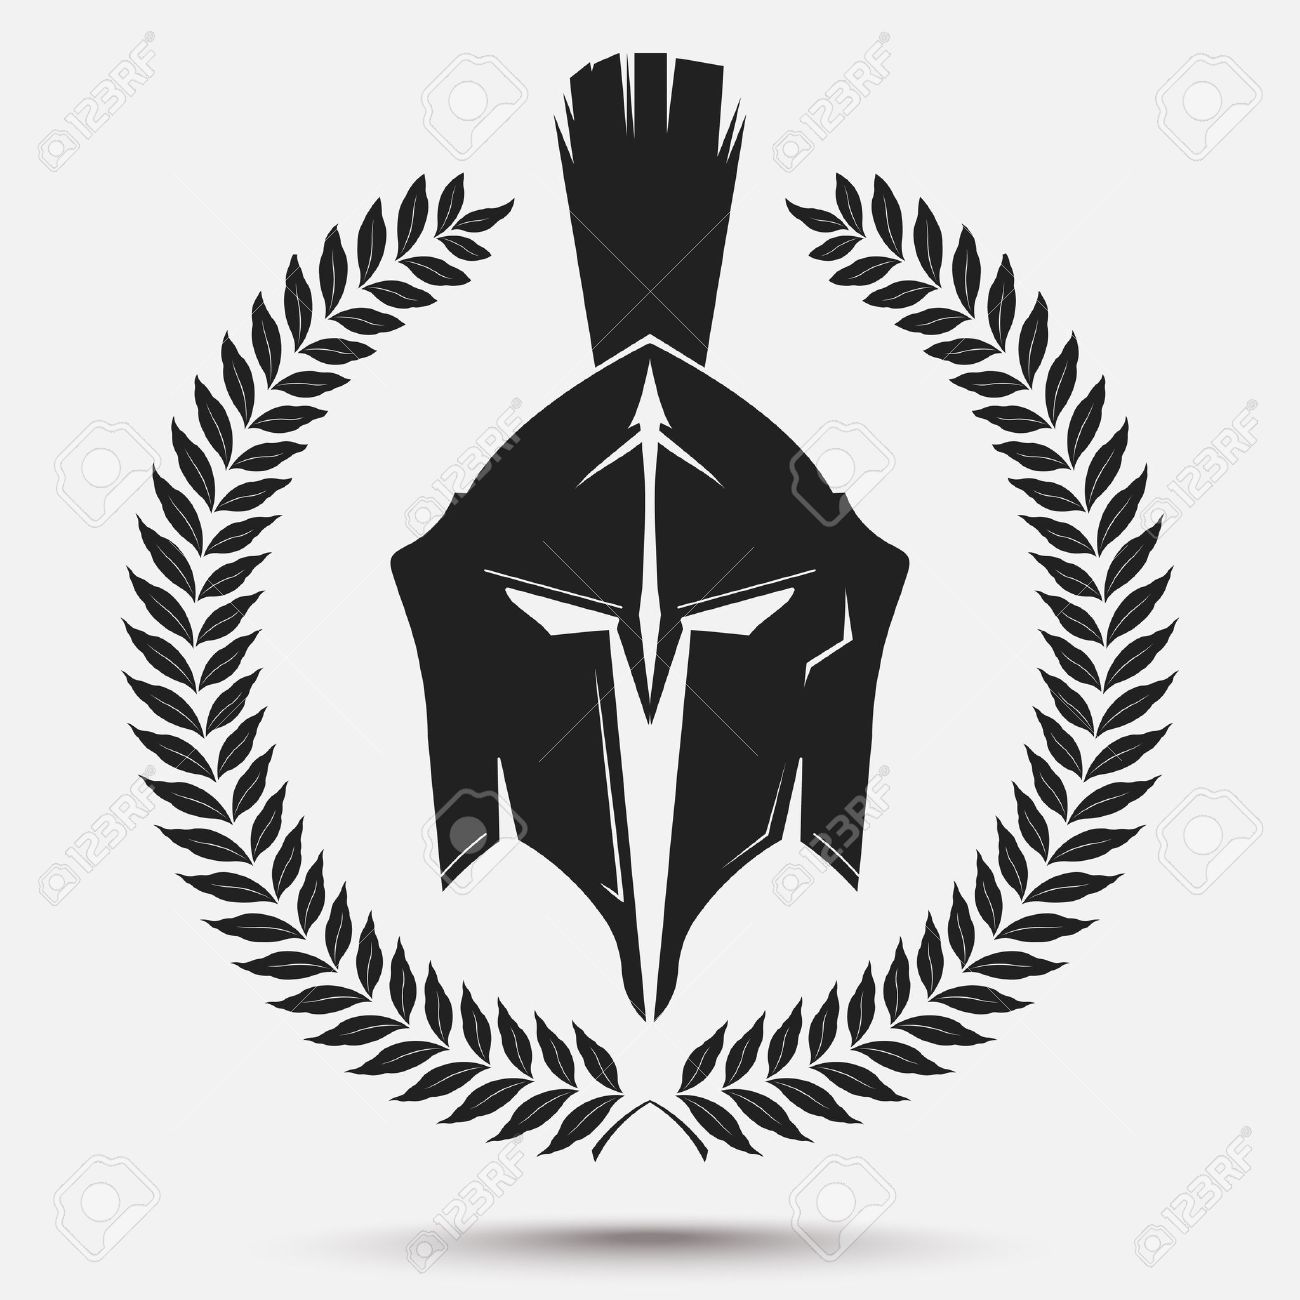 gladiator icon - Google Search | EPIC | Icon Library | Icons